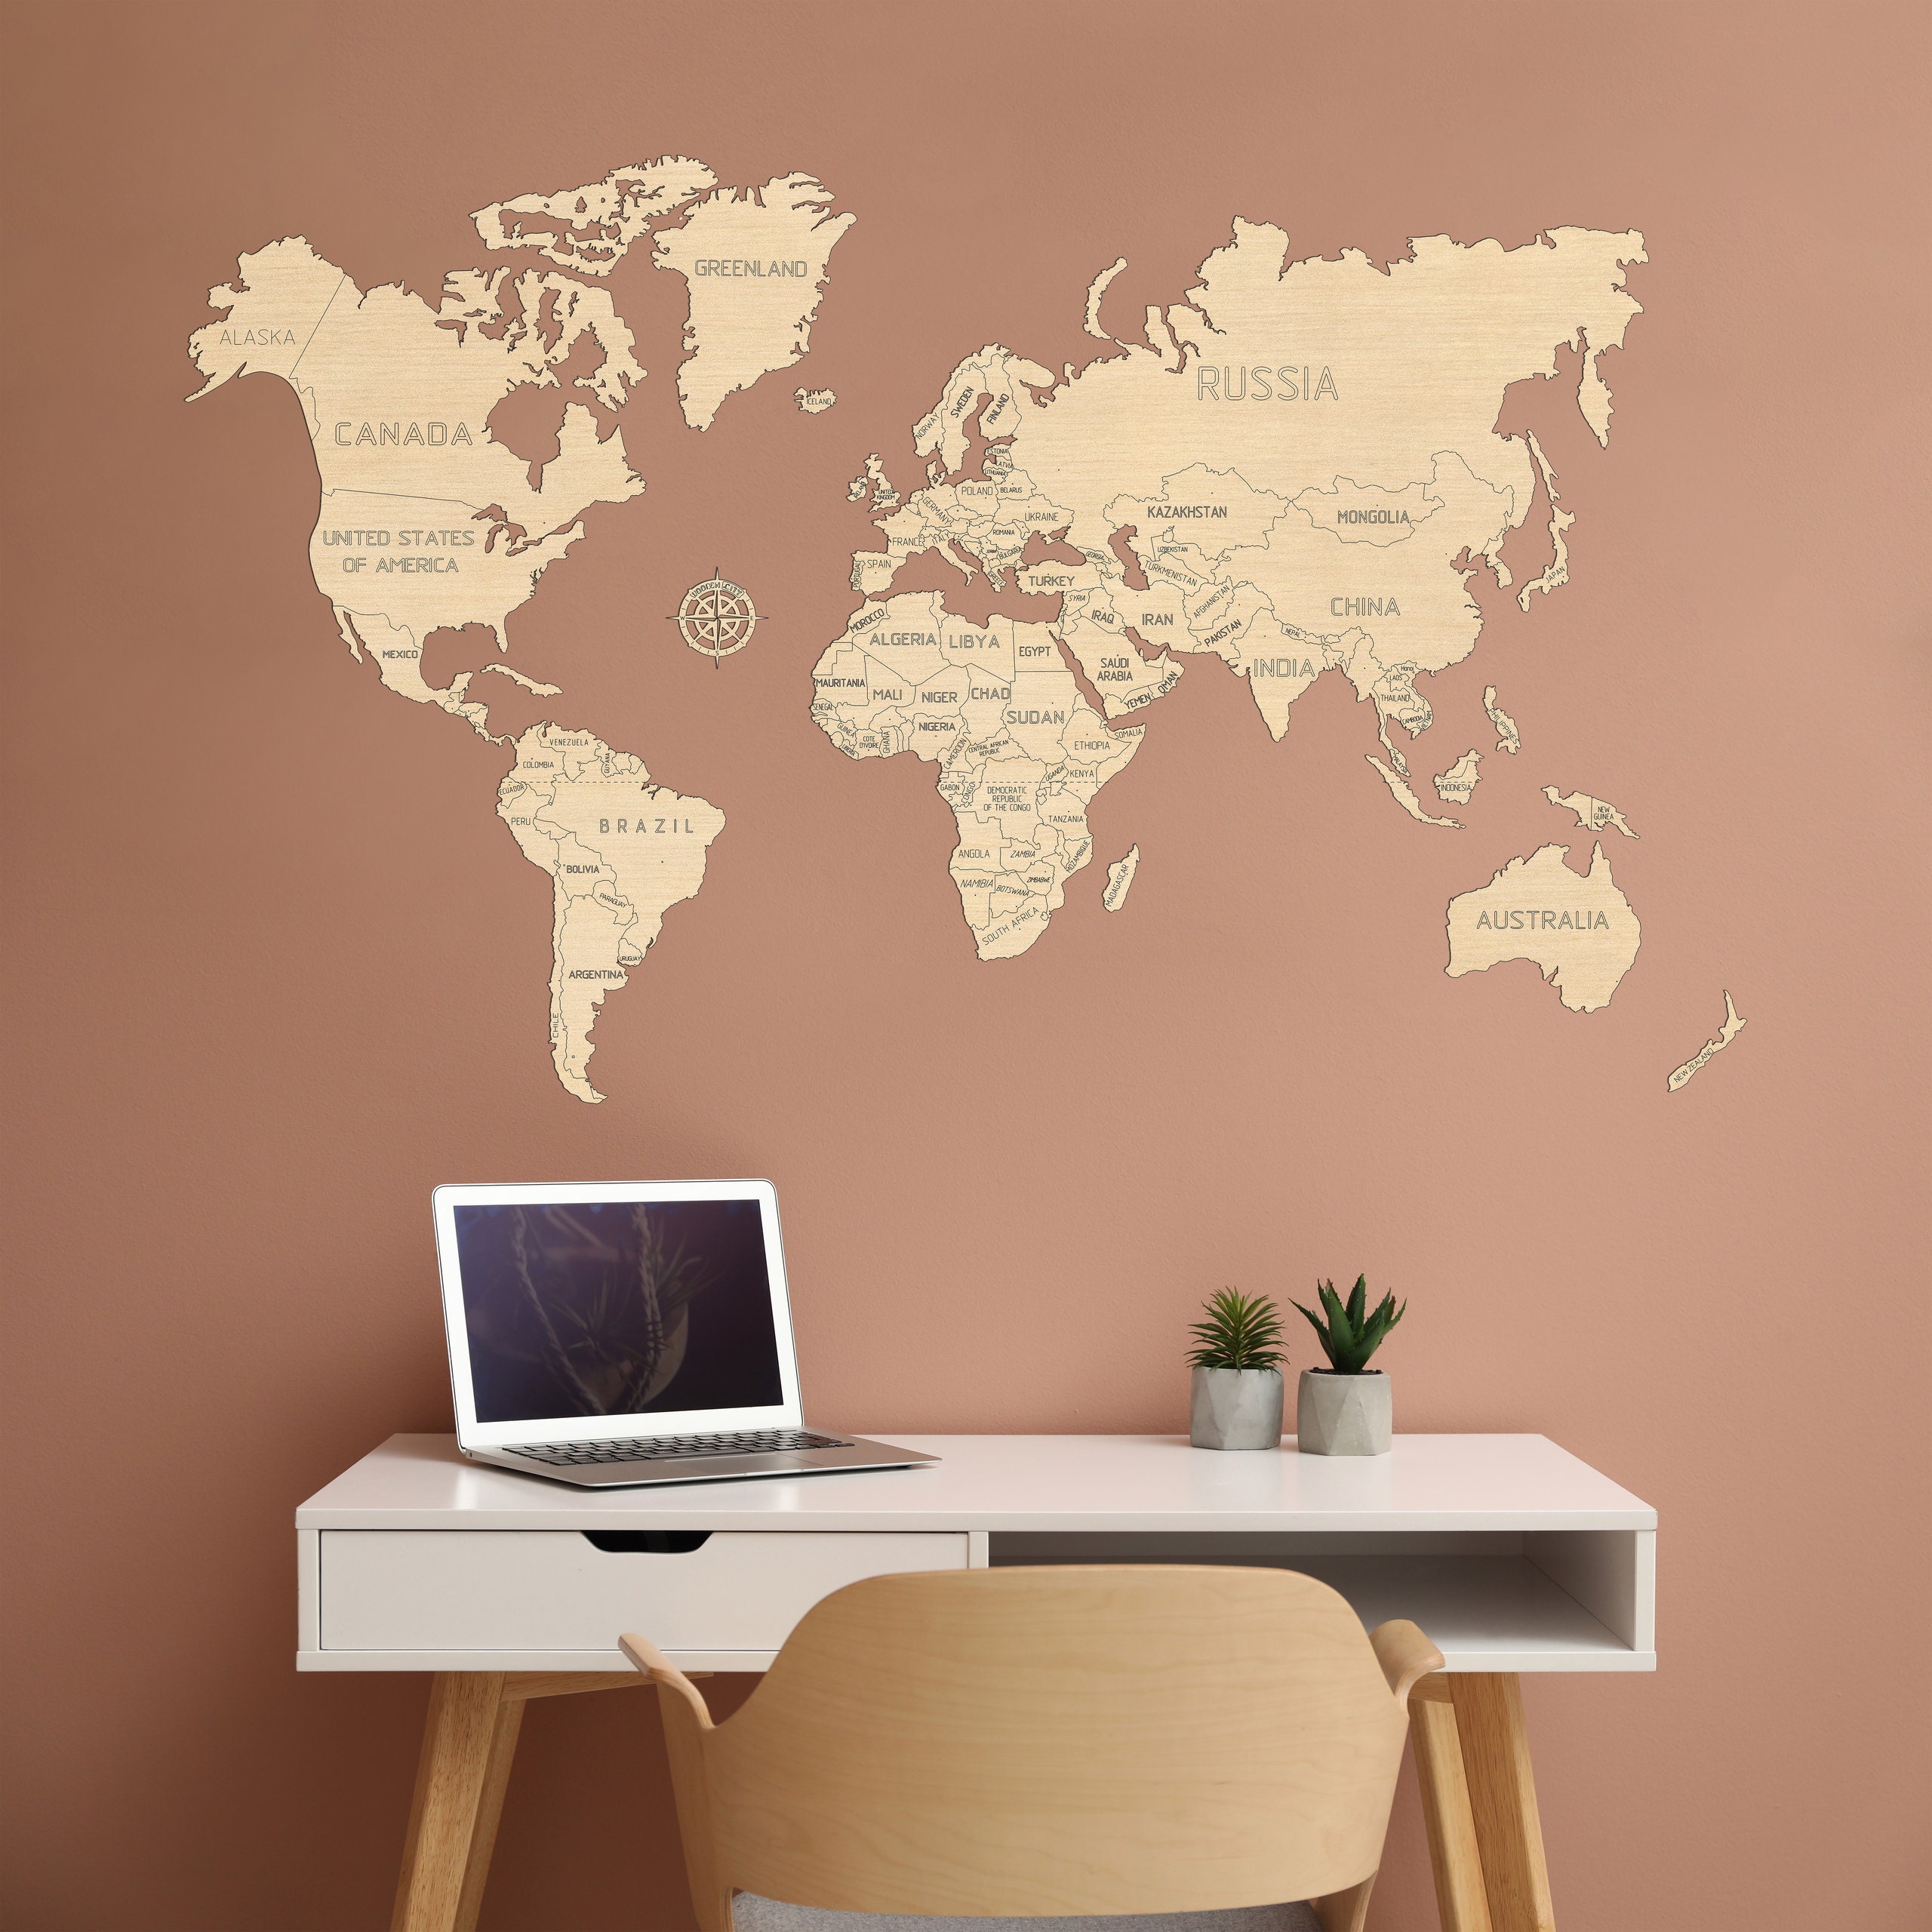 3D Wooden World Map Wall Decor for Home and Office Arcturus, M Multilayered Travel Map with States and Capitals 